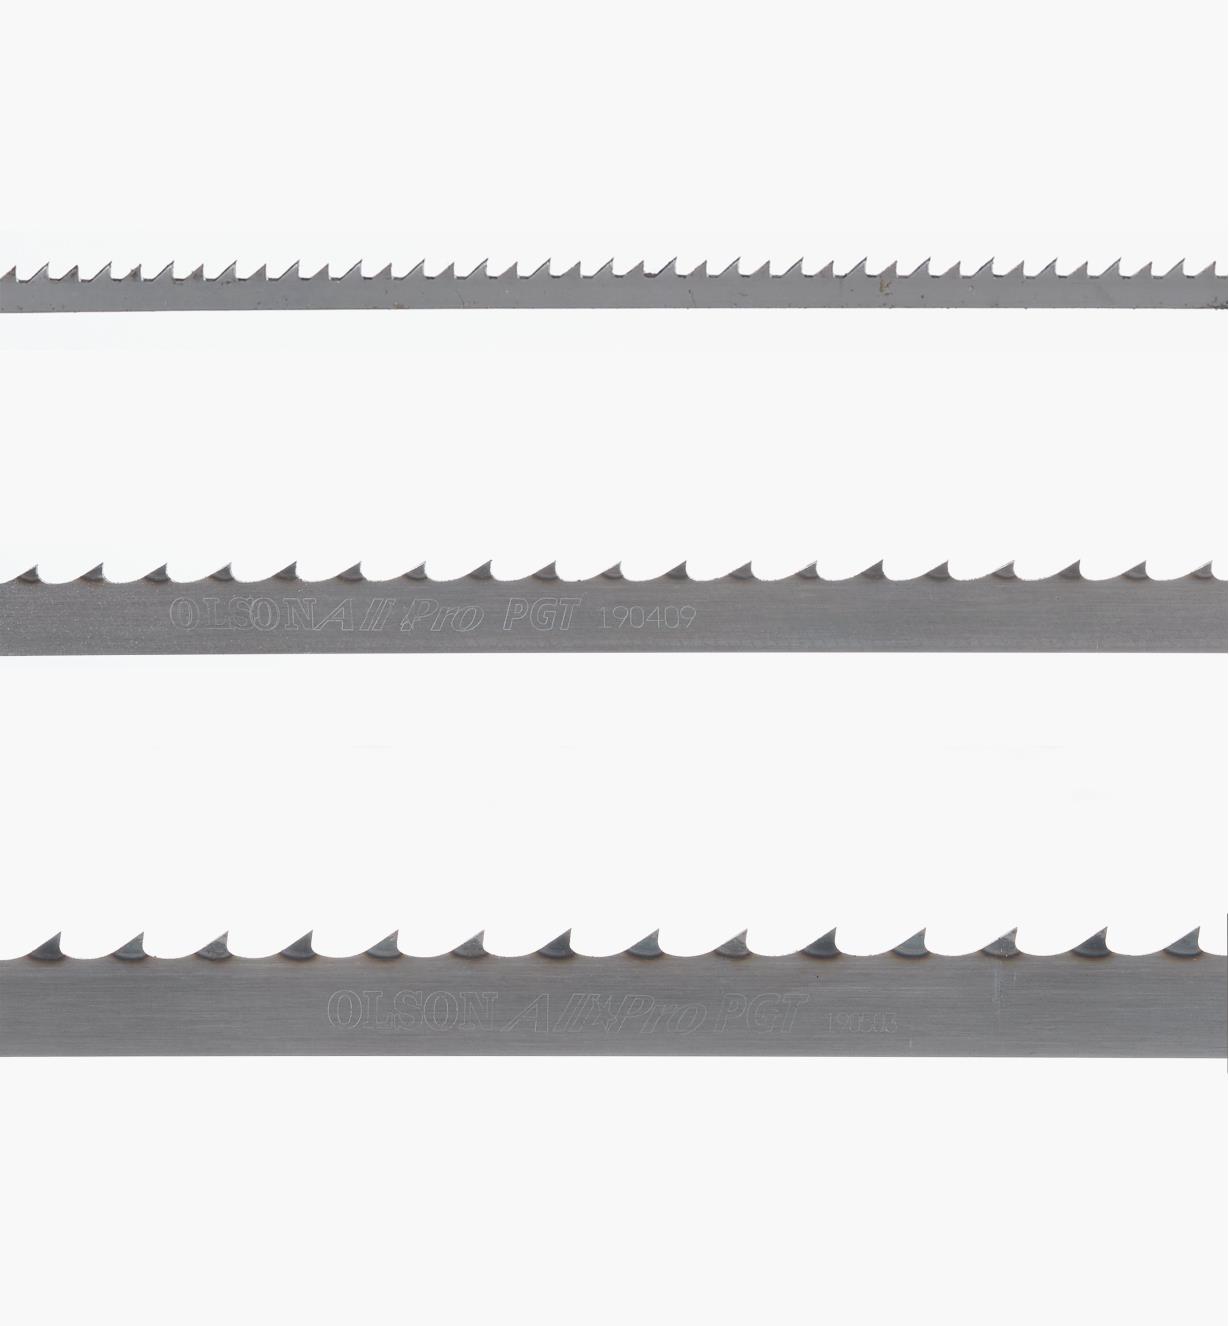 Close-up view showing the tooth patterns of the blade set for 10” Rikon bandsaws